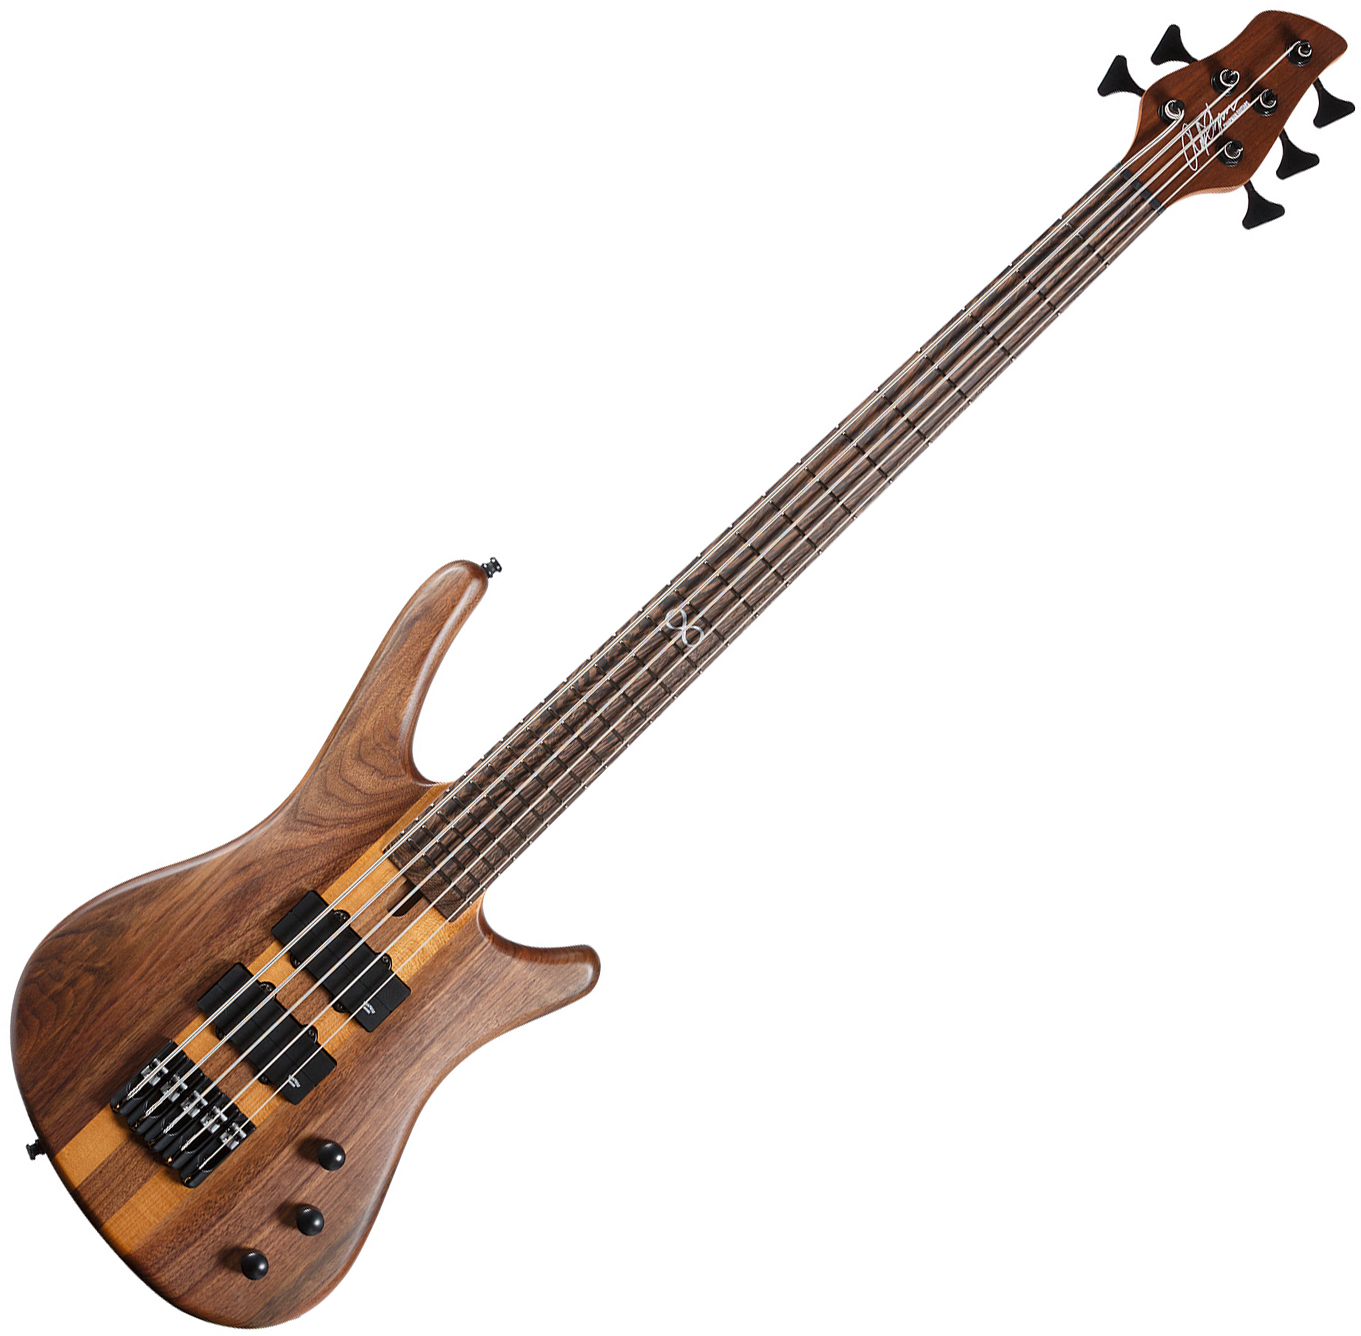 Used bass guitars for sale